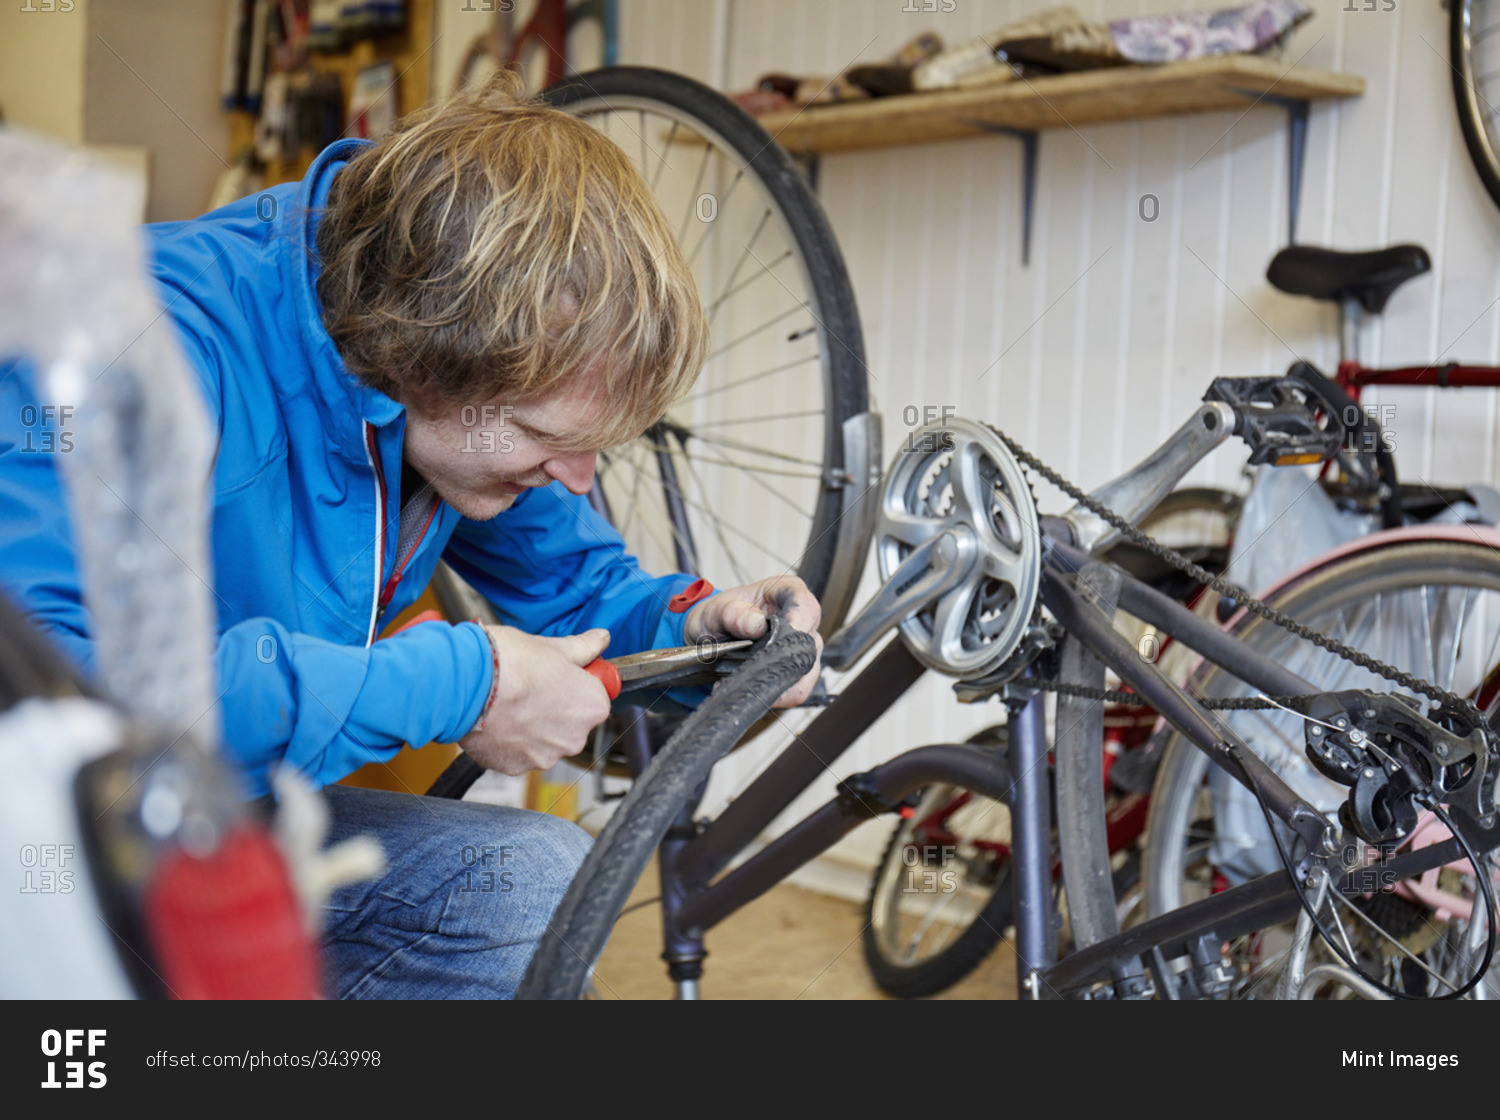 A young man repairing a bicycle in a shop